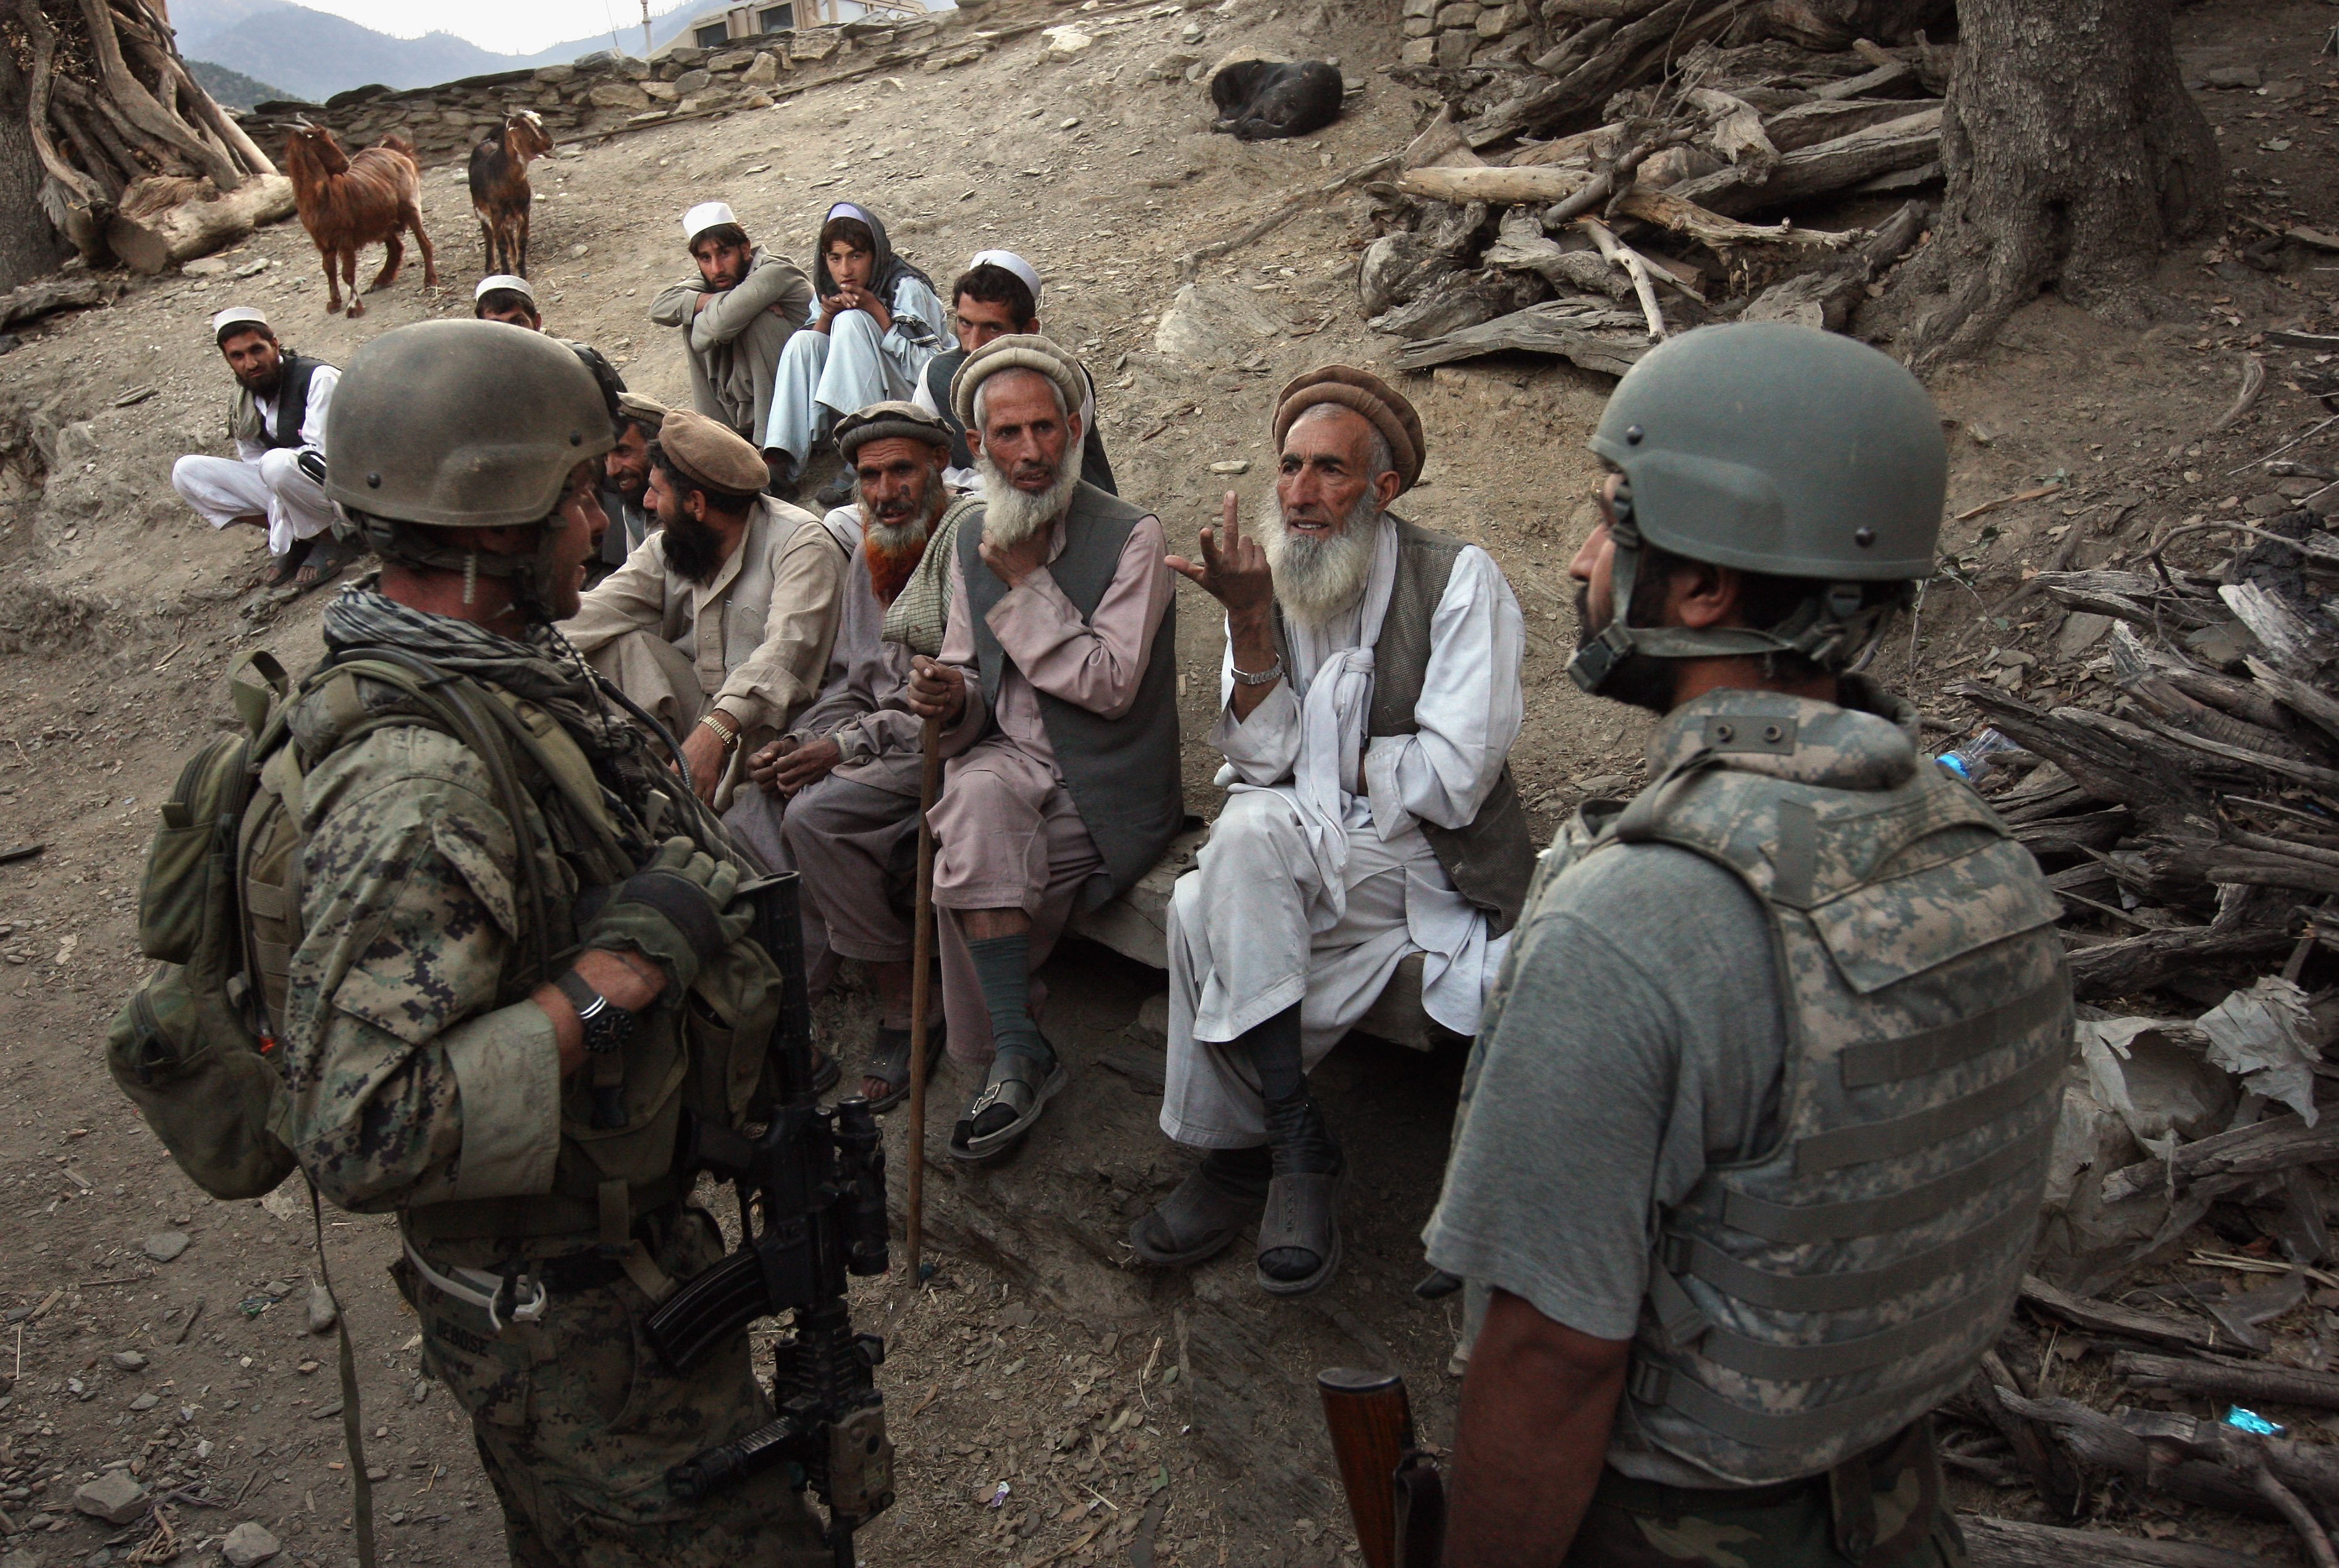 KORENGAL VALLEY, AFGHANISTAN - OCTOBER 25: Village elders speak with a U.S. Marine (L), through an interpreter as American and Afghan forces search for weapons October 25, 2008 in the Korengal Valley of Kunar Province in eastern Afghanistan. (Photo by John Moore/Getty Images)